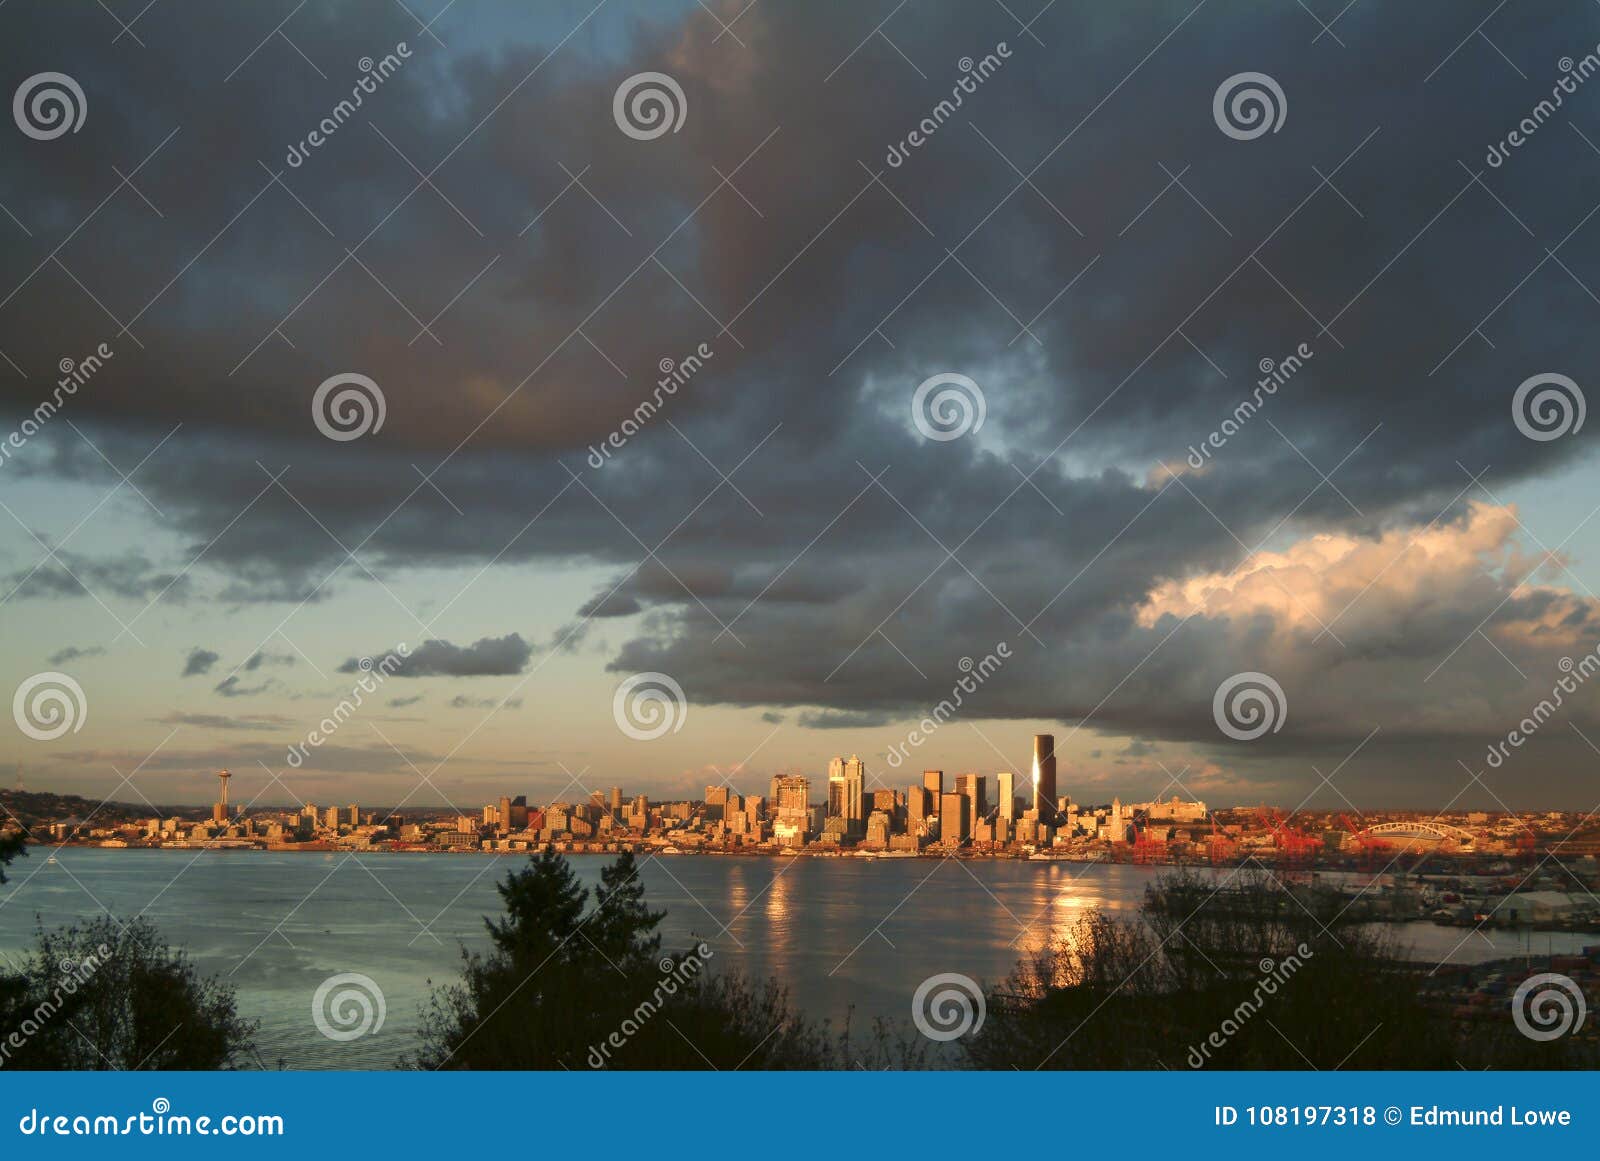 seattle skyline during a dramatic sunset and a rain squall passing through.